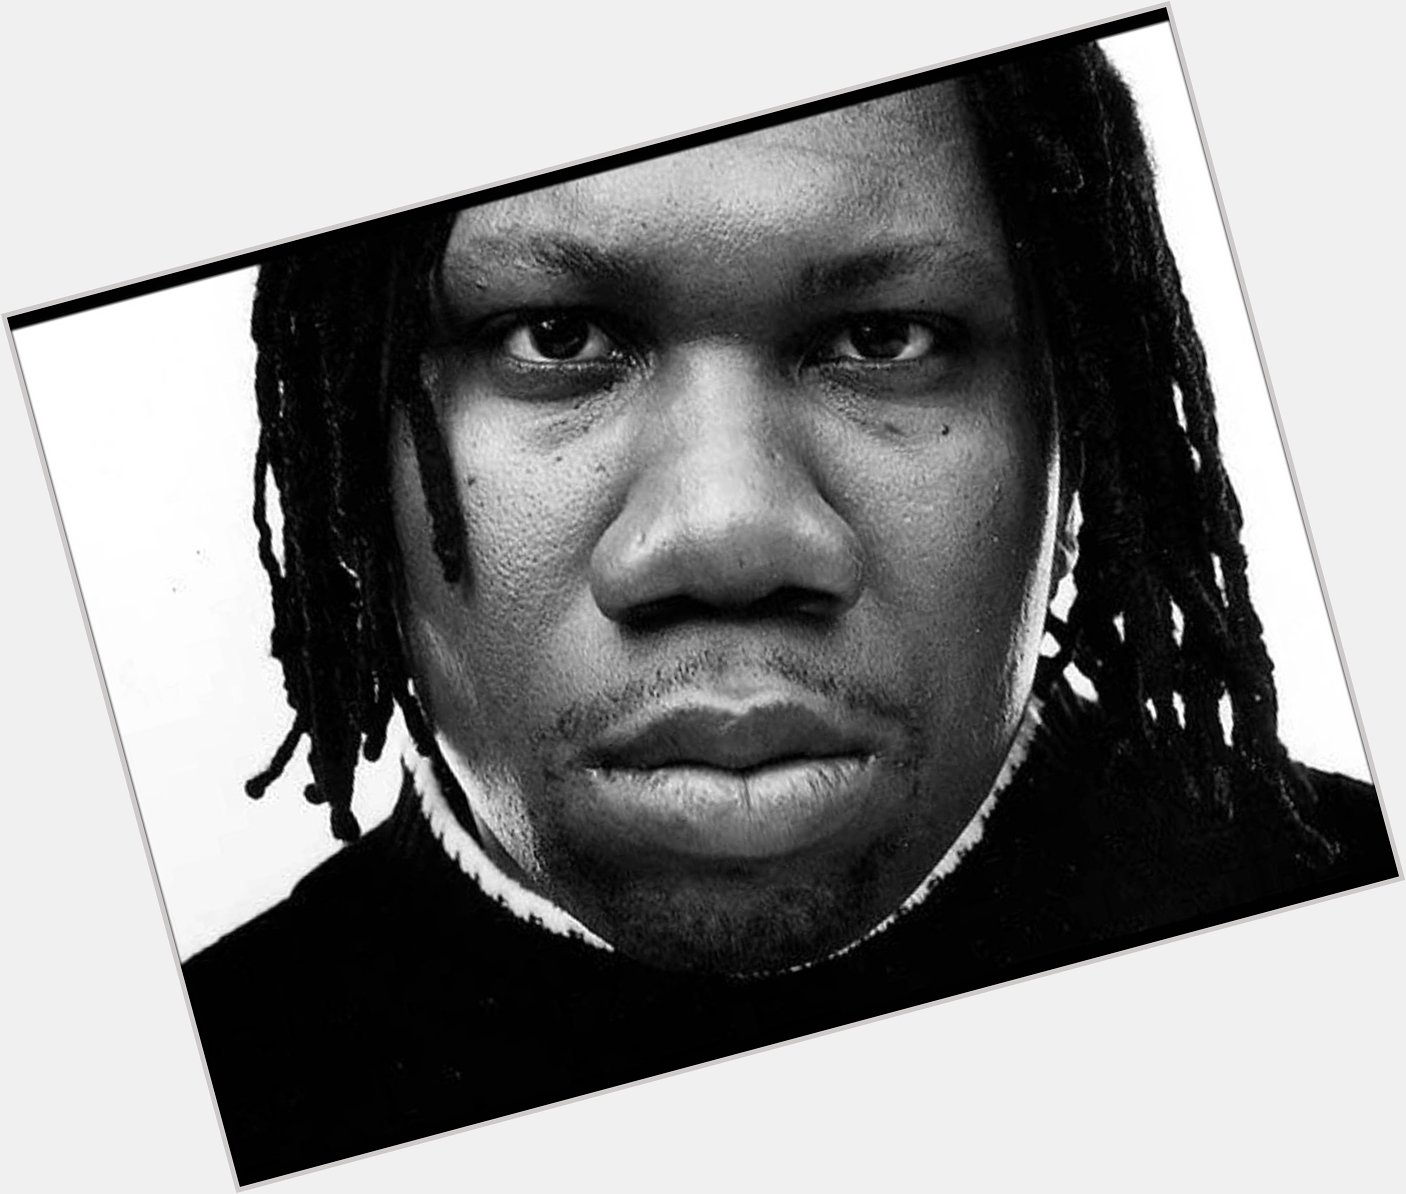 Happy Birthday to my teacha, my mentor, the creator of Beast 1333, my idol and role model the Blastmaster KRS One. 